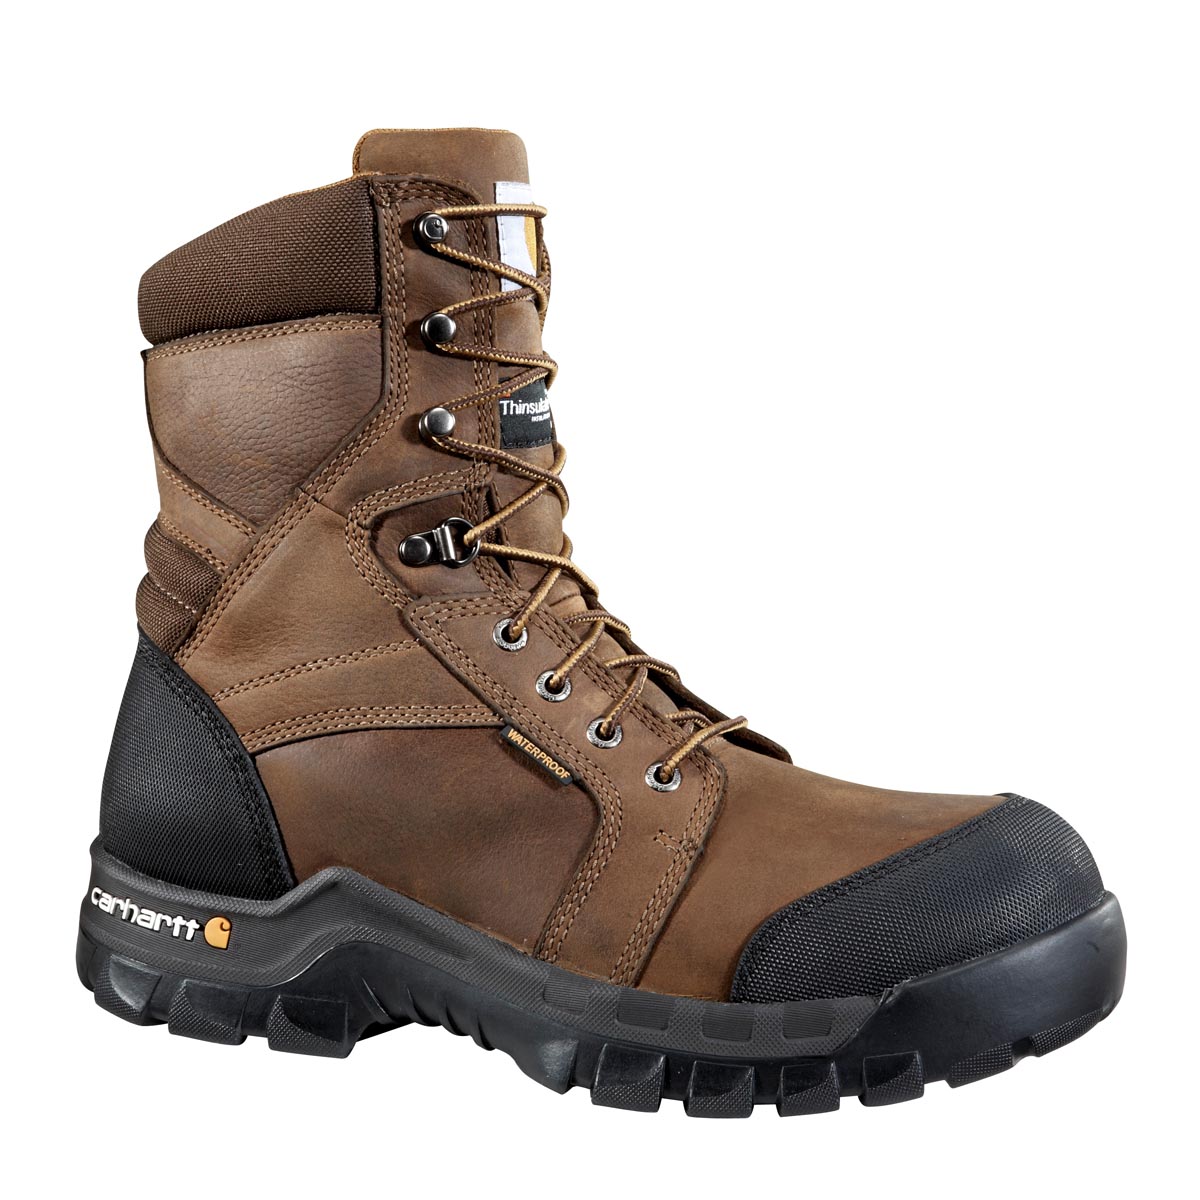 Carhartt Men's 8 Inch Brown Rugged Flex Waterproof Insulated Work Boot Non Safety Toe